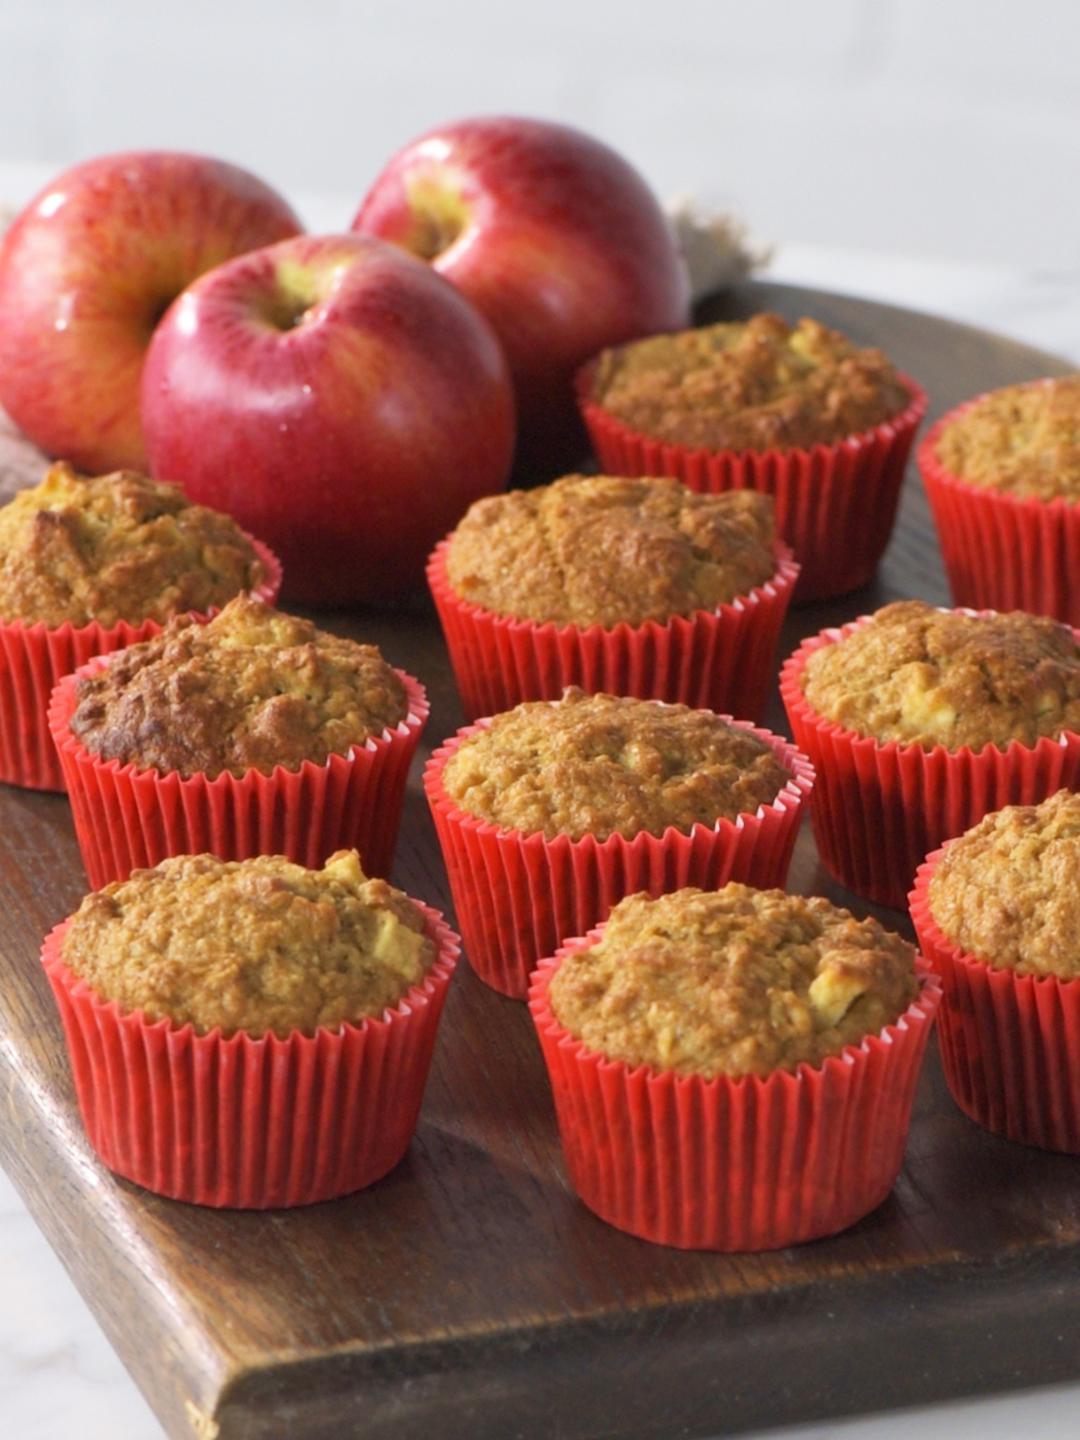 Whole Wheat Apple and Oat Muffins